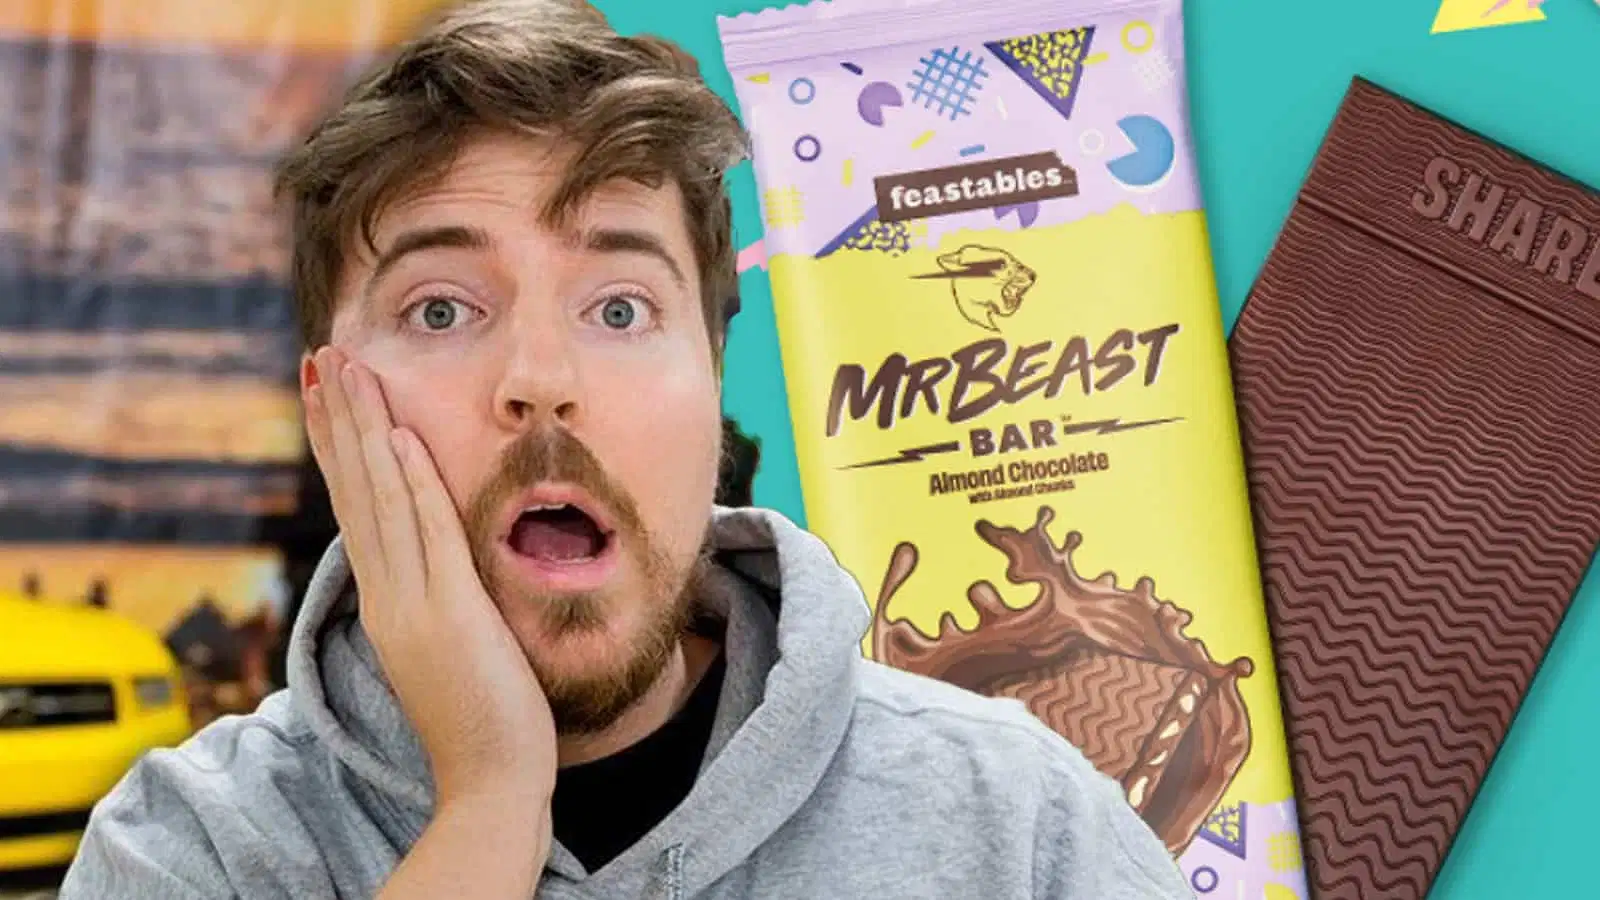 MrBeast's Almond Chocolate Bar - A Delicious Feastables Review!